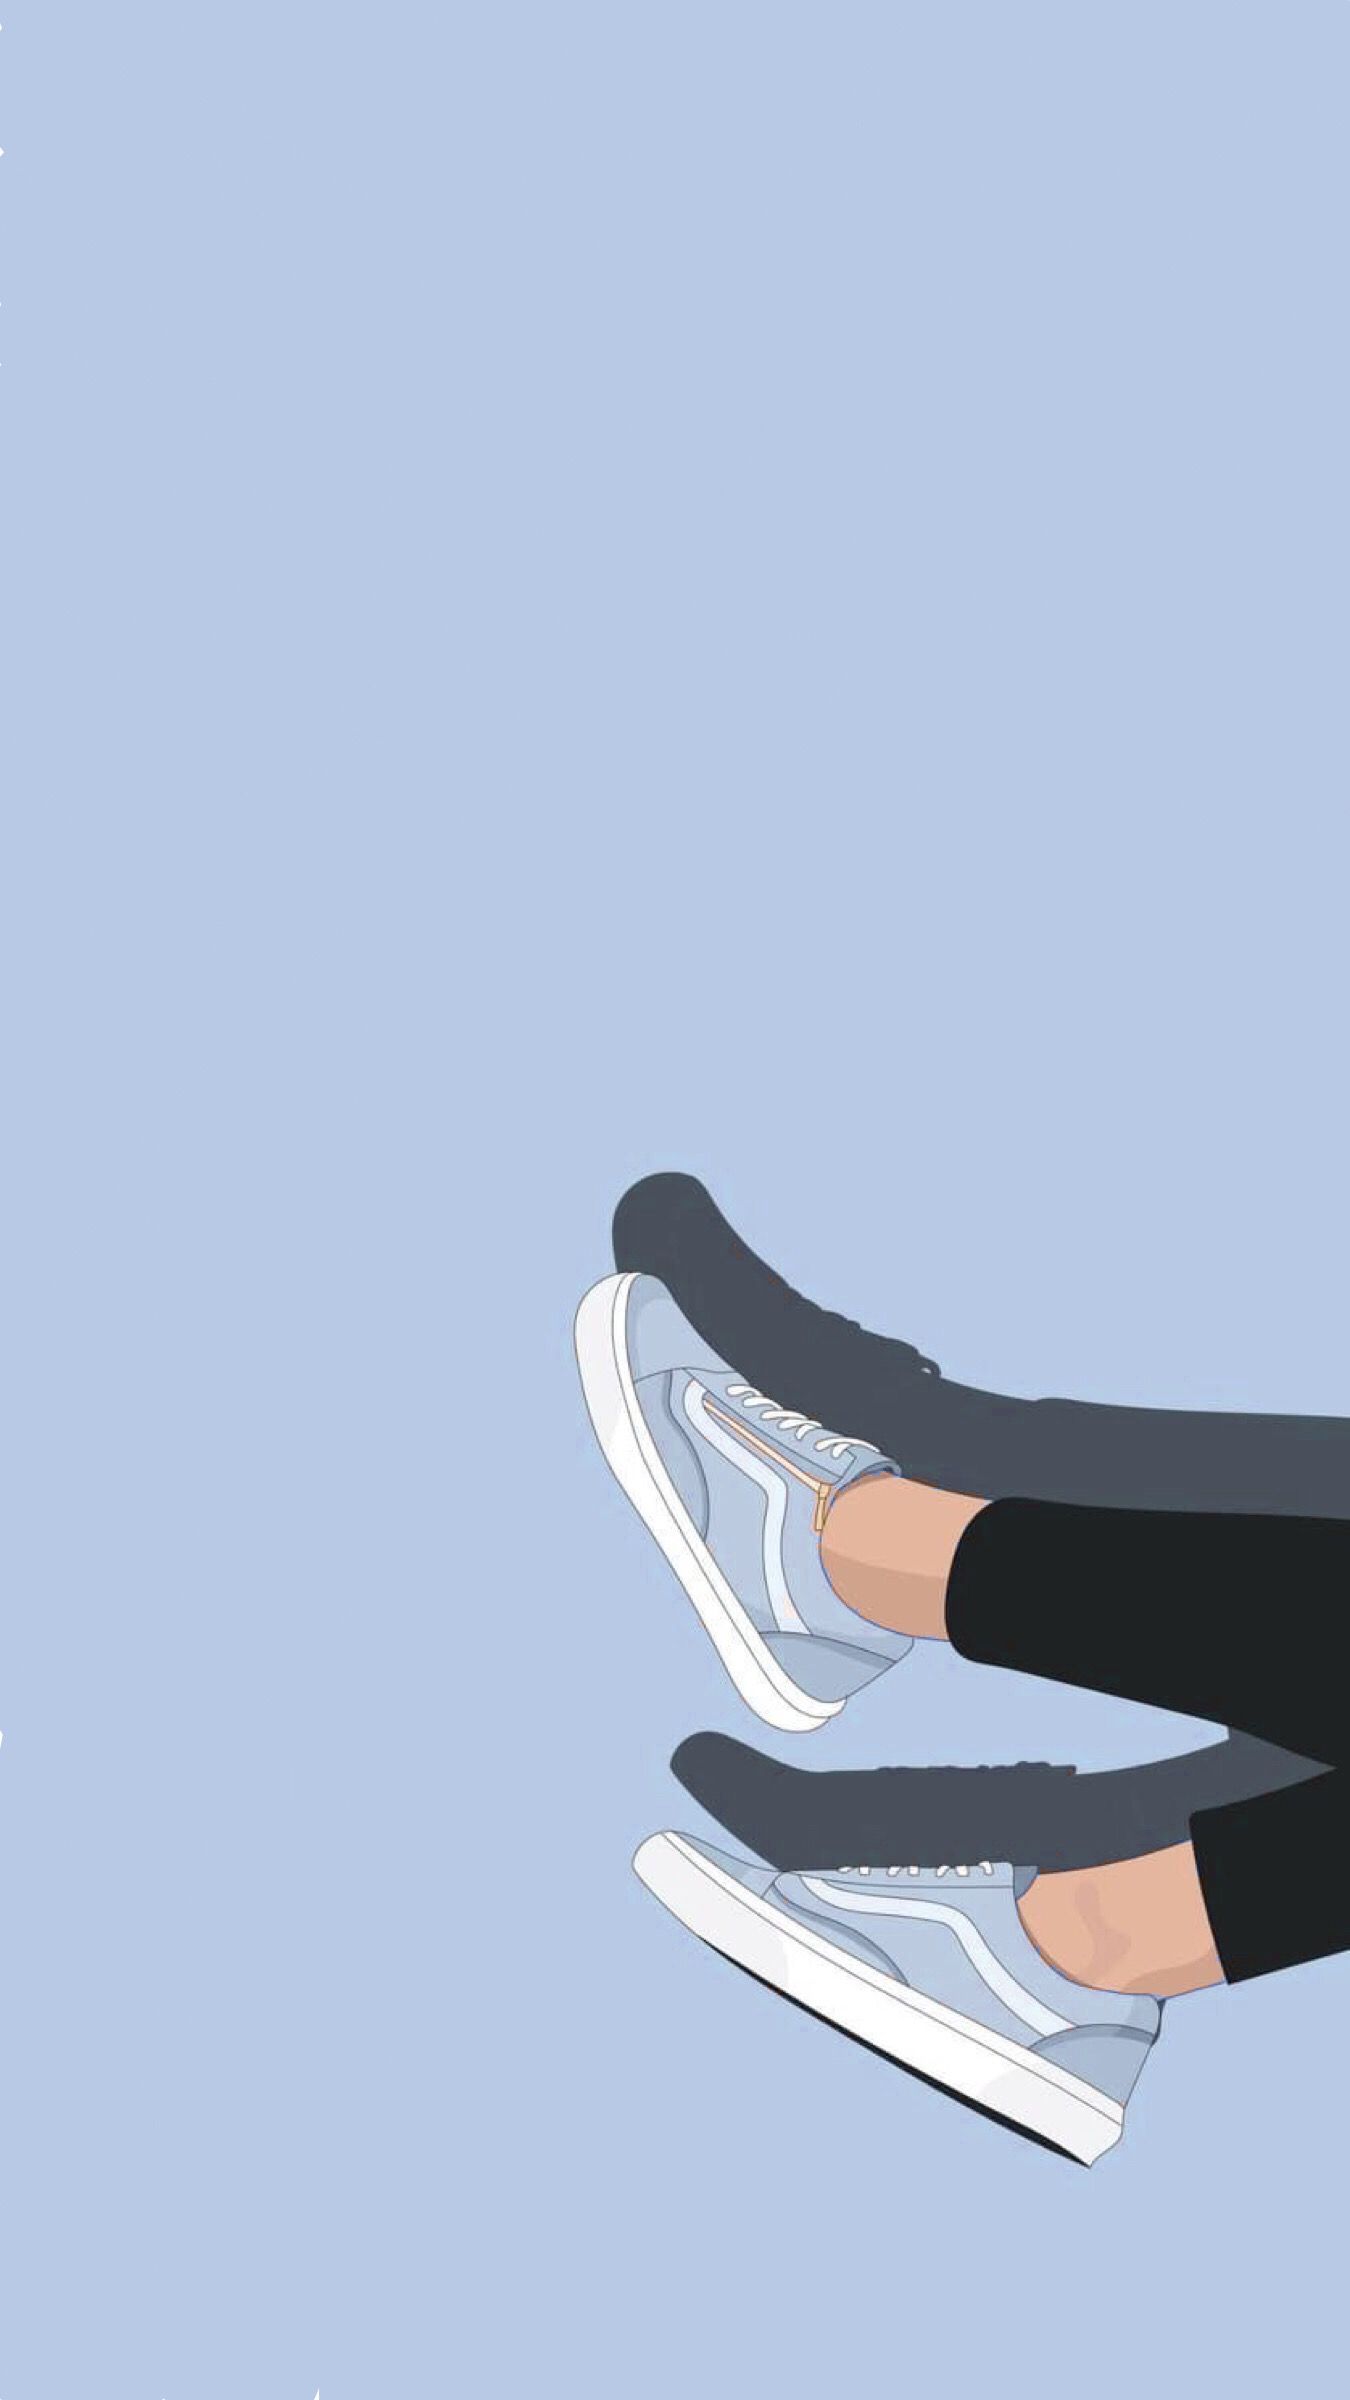 Aesthetic wallpaper for phone background, featuring a pair of feet in sneakers on a blue background - Vans, shoes, blue anime